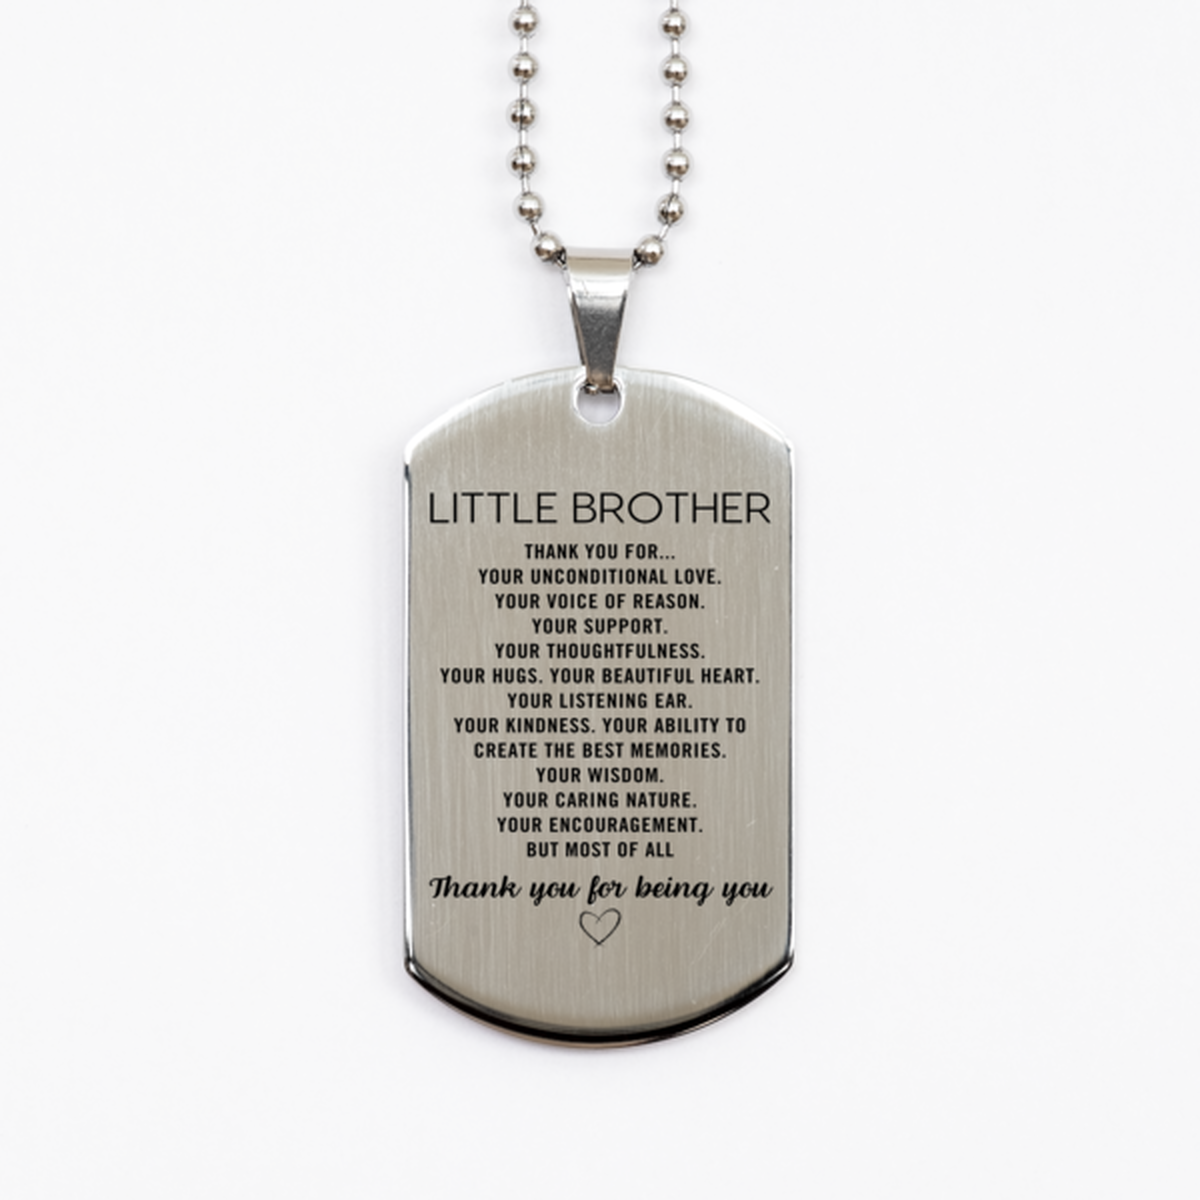 Little Brother Silver Dog Tag Custom, Engraved Gifts For Little Brother Christmas Graduation Birthday Gifts for Men Women Little Brother Thank you for Your unconditional love